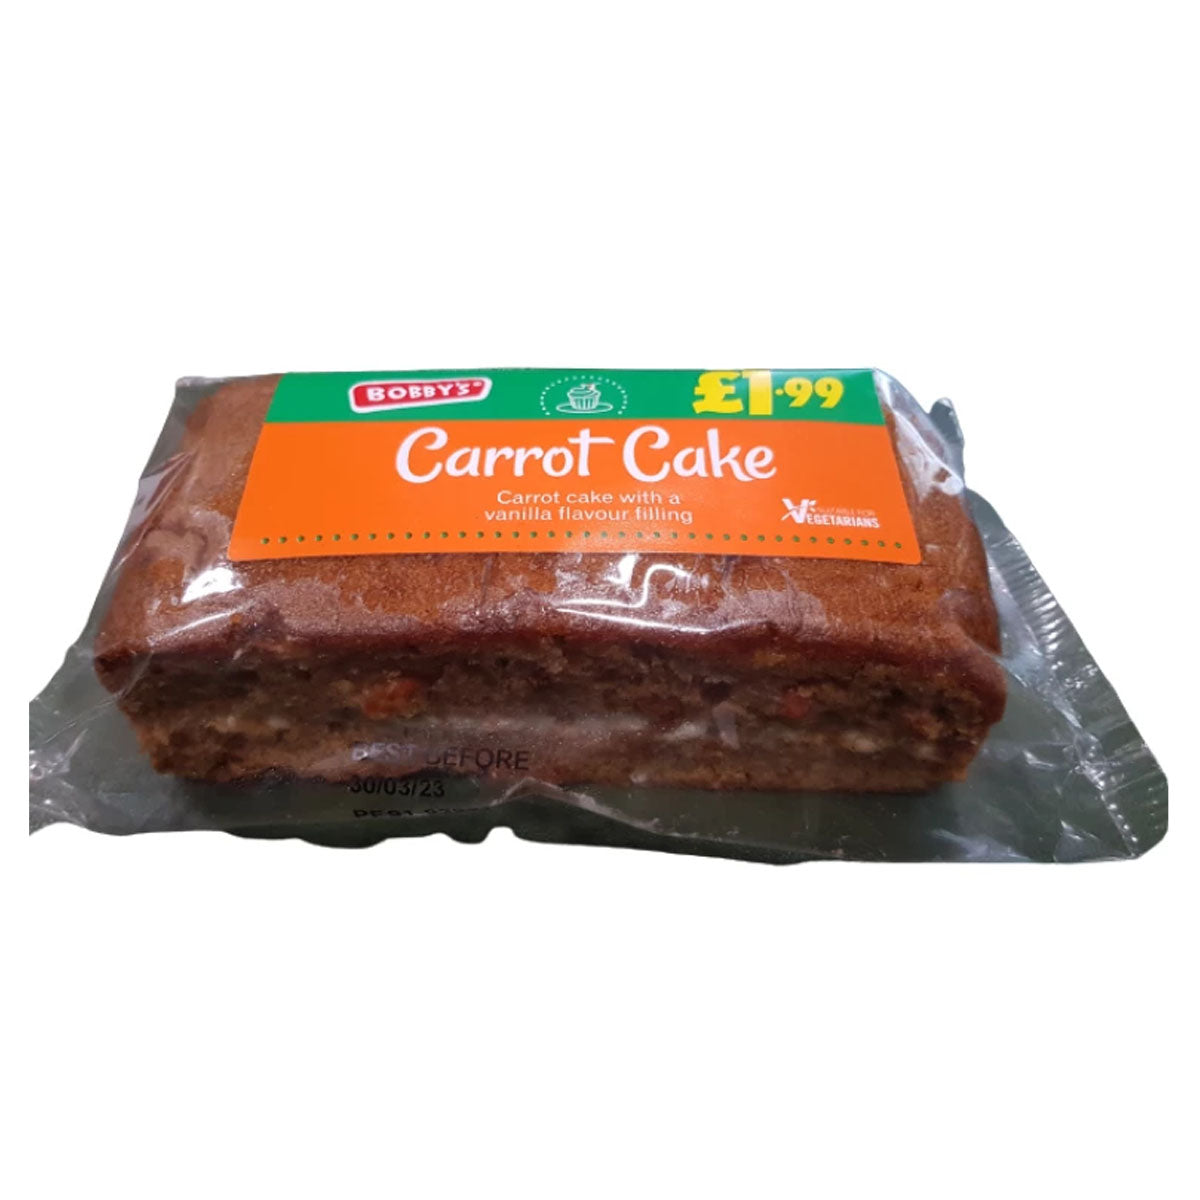 A Bobby s - Carrot Cake - 275g in a package on a white background.